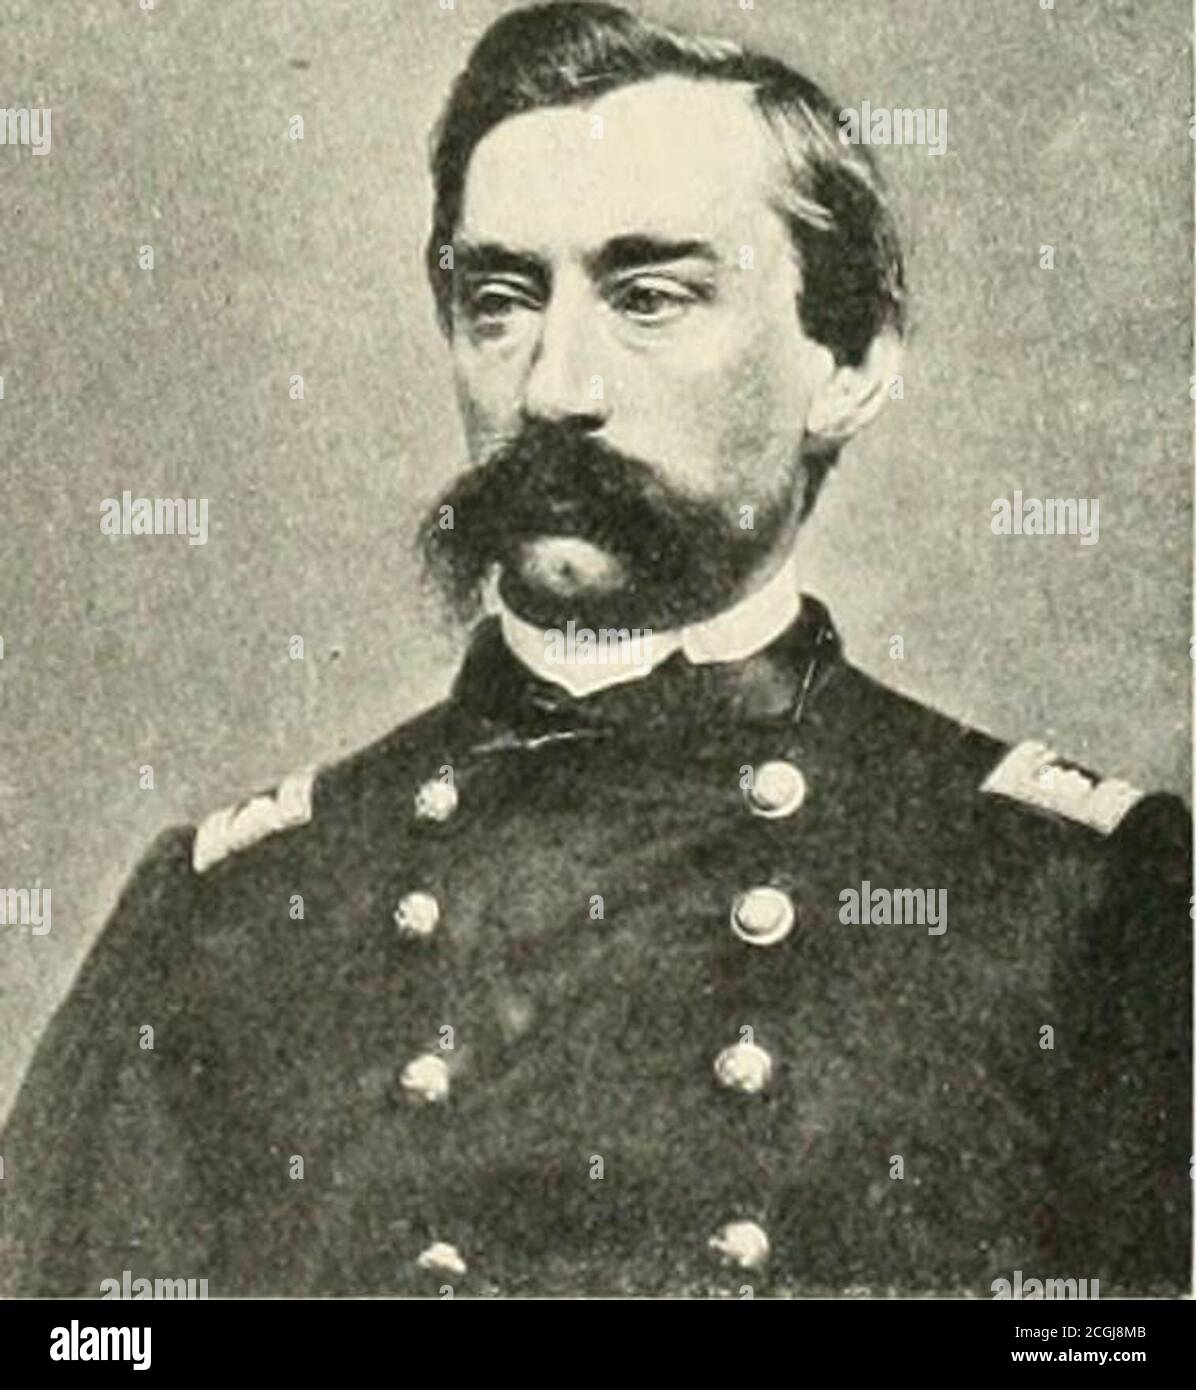 . The photographic history of the civil war.. . Joseph Dickinson, Brevetted forGallantry on Staff Dutyat Gettysburg. No. 8—MAINE Neal Dow, Captured and Exchanged for aSon of Gen. R. E. Lee. ©ruth Anrnj (tepa Cheated September 3, 1863, to consist oftlio troops in the Department of the South. Itscommanders wore Brigadier-General John M.Brannan, and Major-Generals O. M. Mitchel,David Hunter, and Q. A. Gilhnorc. It took partin the various operations around Charleston Har-bor, and in February, 1864, one division went toFlorida, where it suffered severely in the battle ofOlustee. In April, 186-1, th Stock Photo